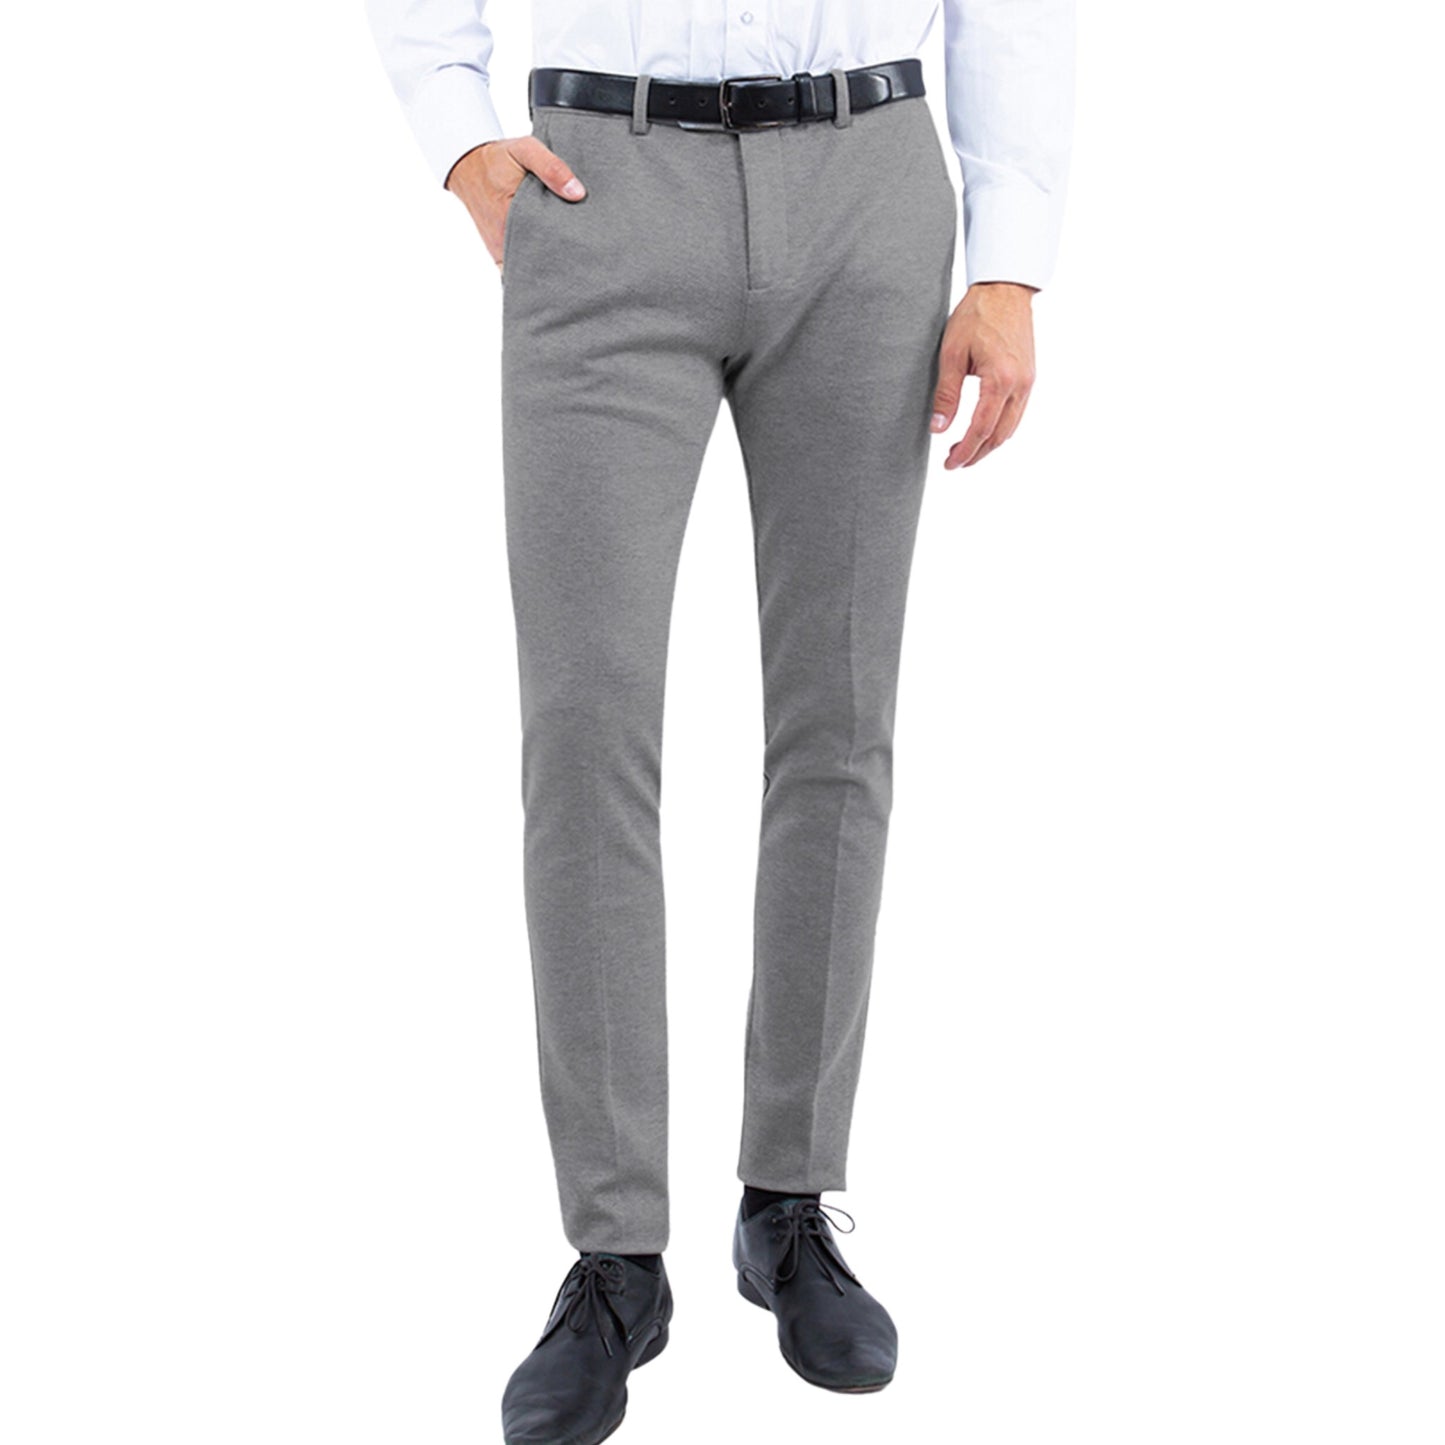 Man wearing Flex Tailor's Heather Gray Slim-Fit Trousers, highlighting the slim cut and comfortable fit.